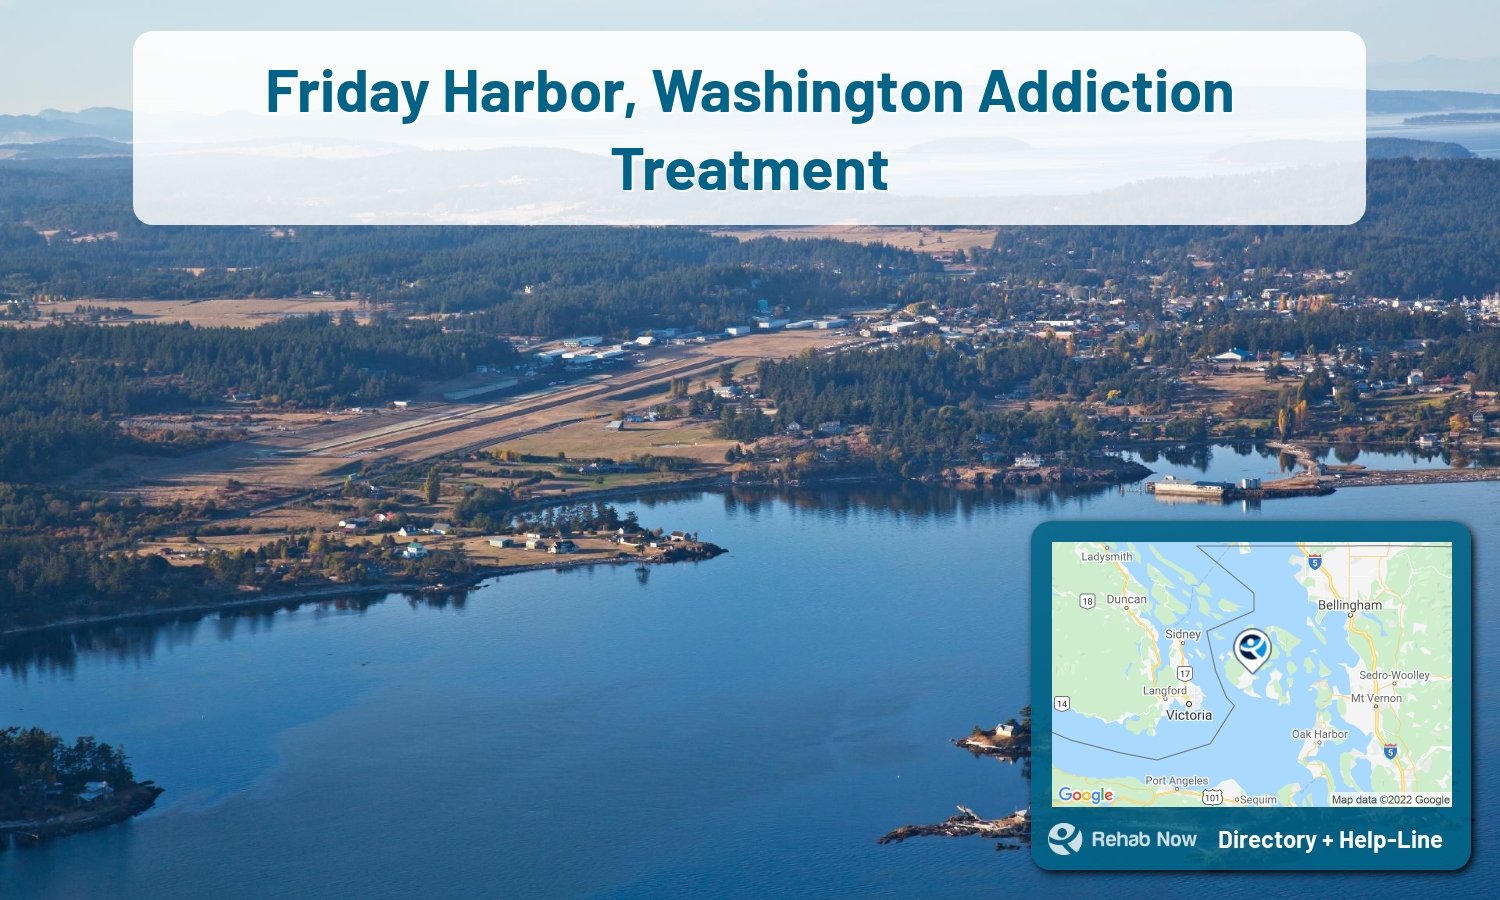 View options, availability, treatment methods, and more, for drug rehab and alcohol treatment in Friday Harbor, Washington